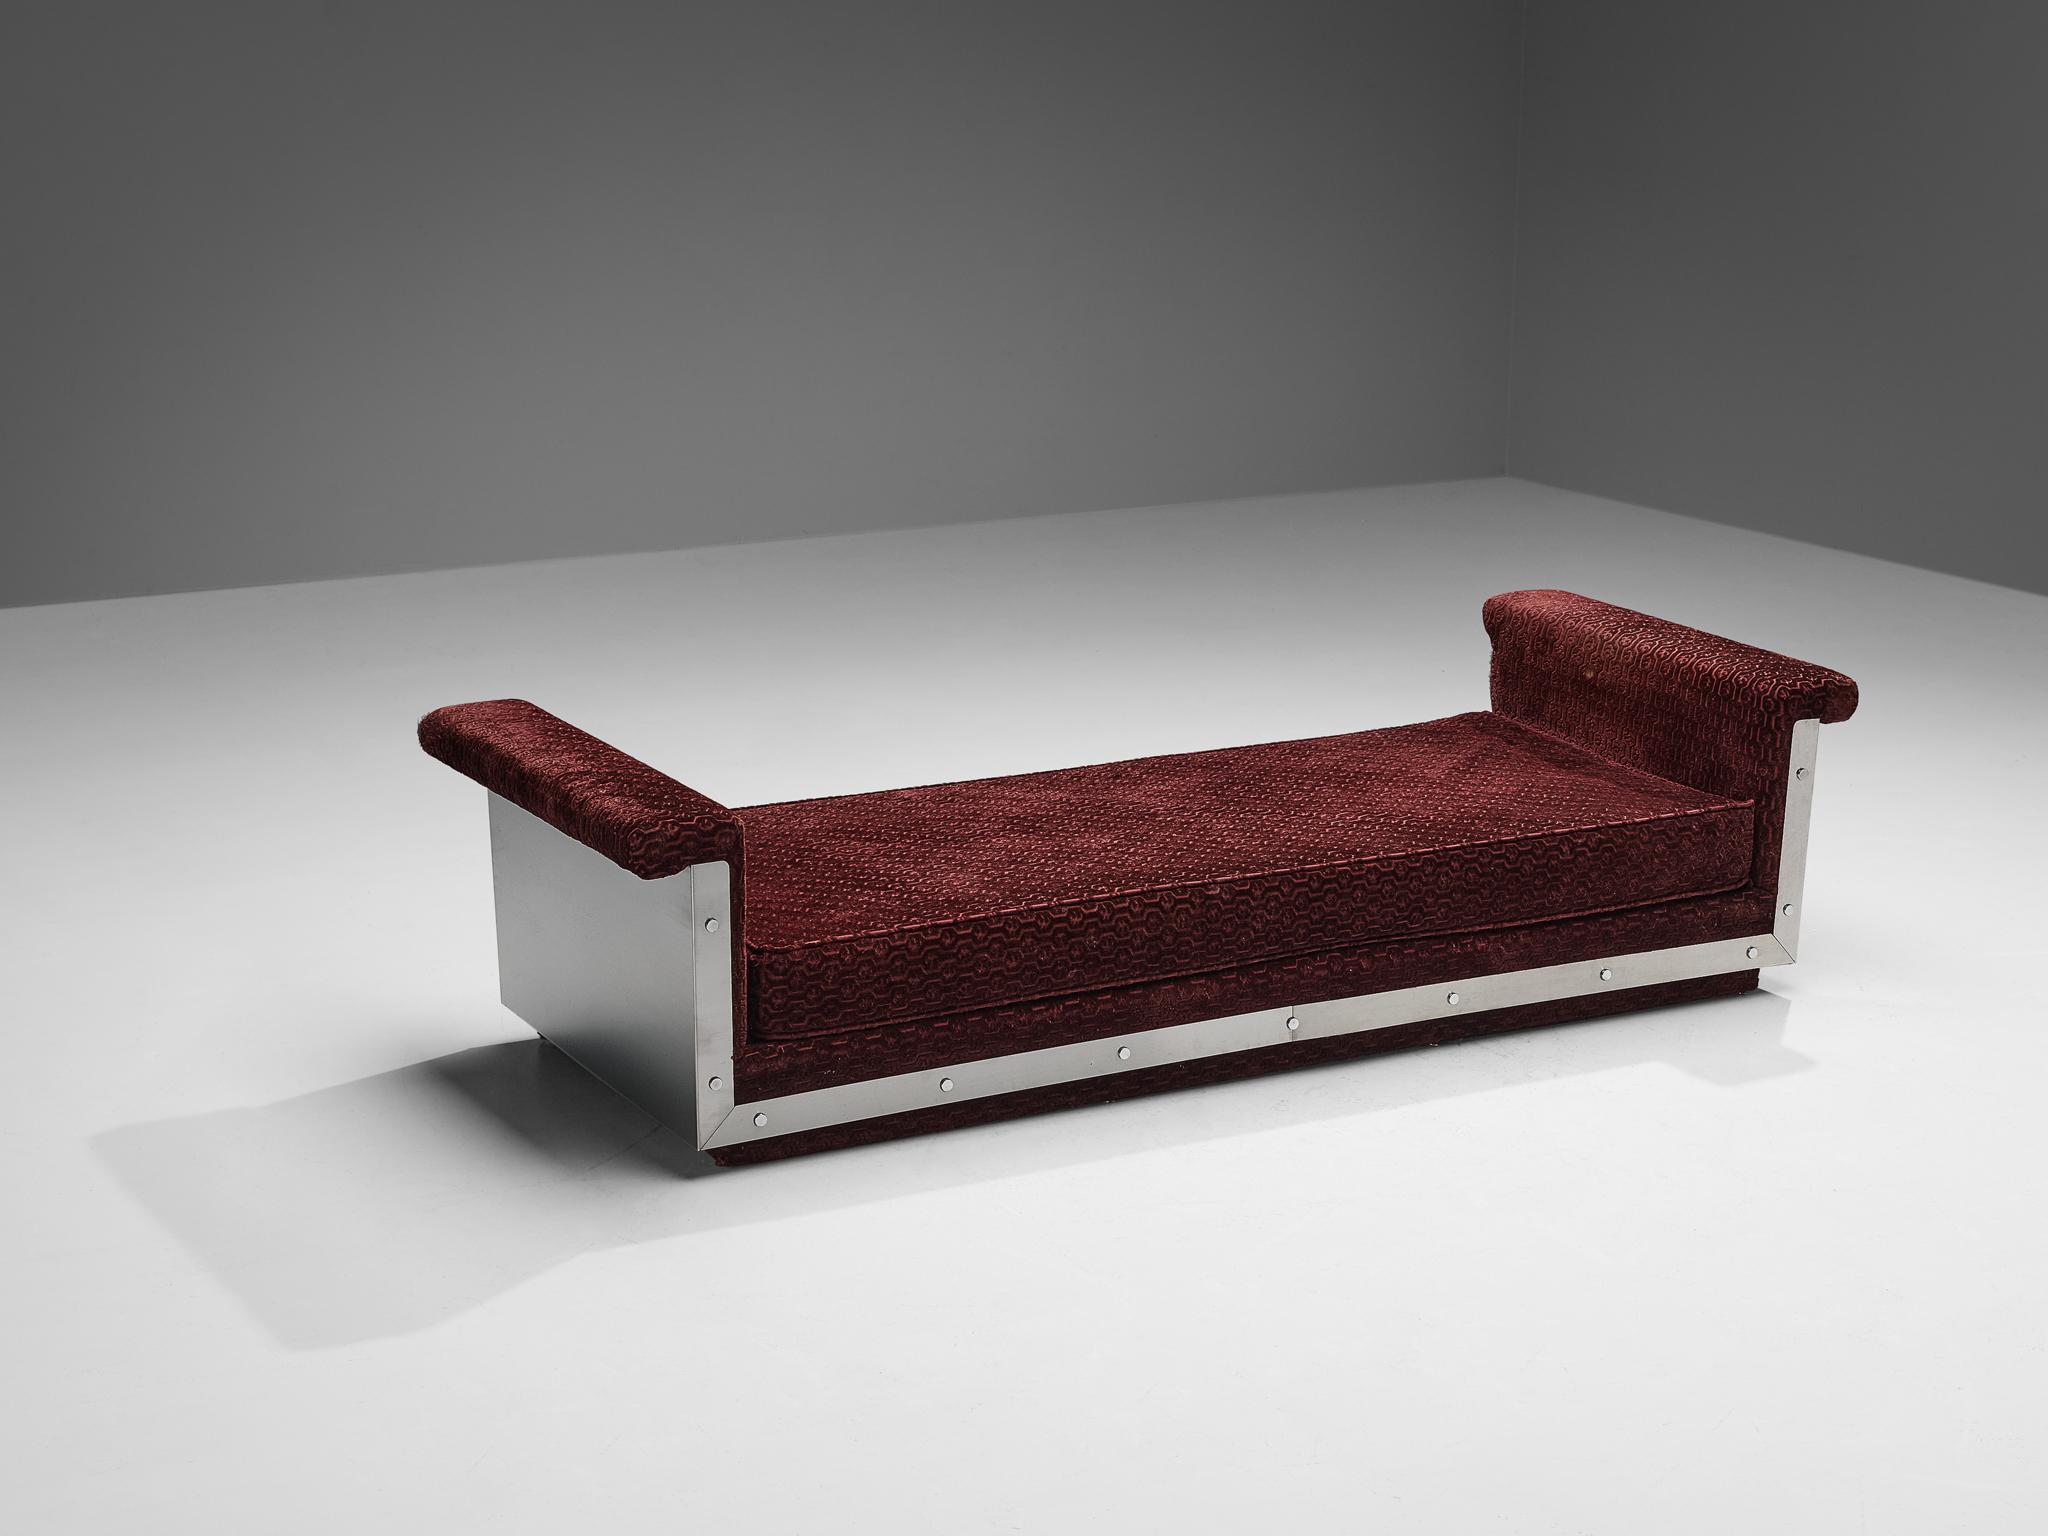 Daybed sofa, stainless steel, fabric, France, late 1960s.

Modern and sleek daybed in stainless steel and velvet patterned upholstery. This design has a very strong expression due to the minimalist shaped steel frame. This Industrial base holds the